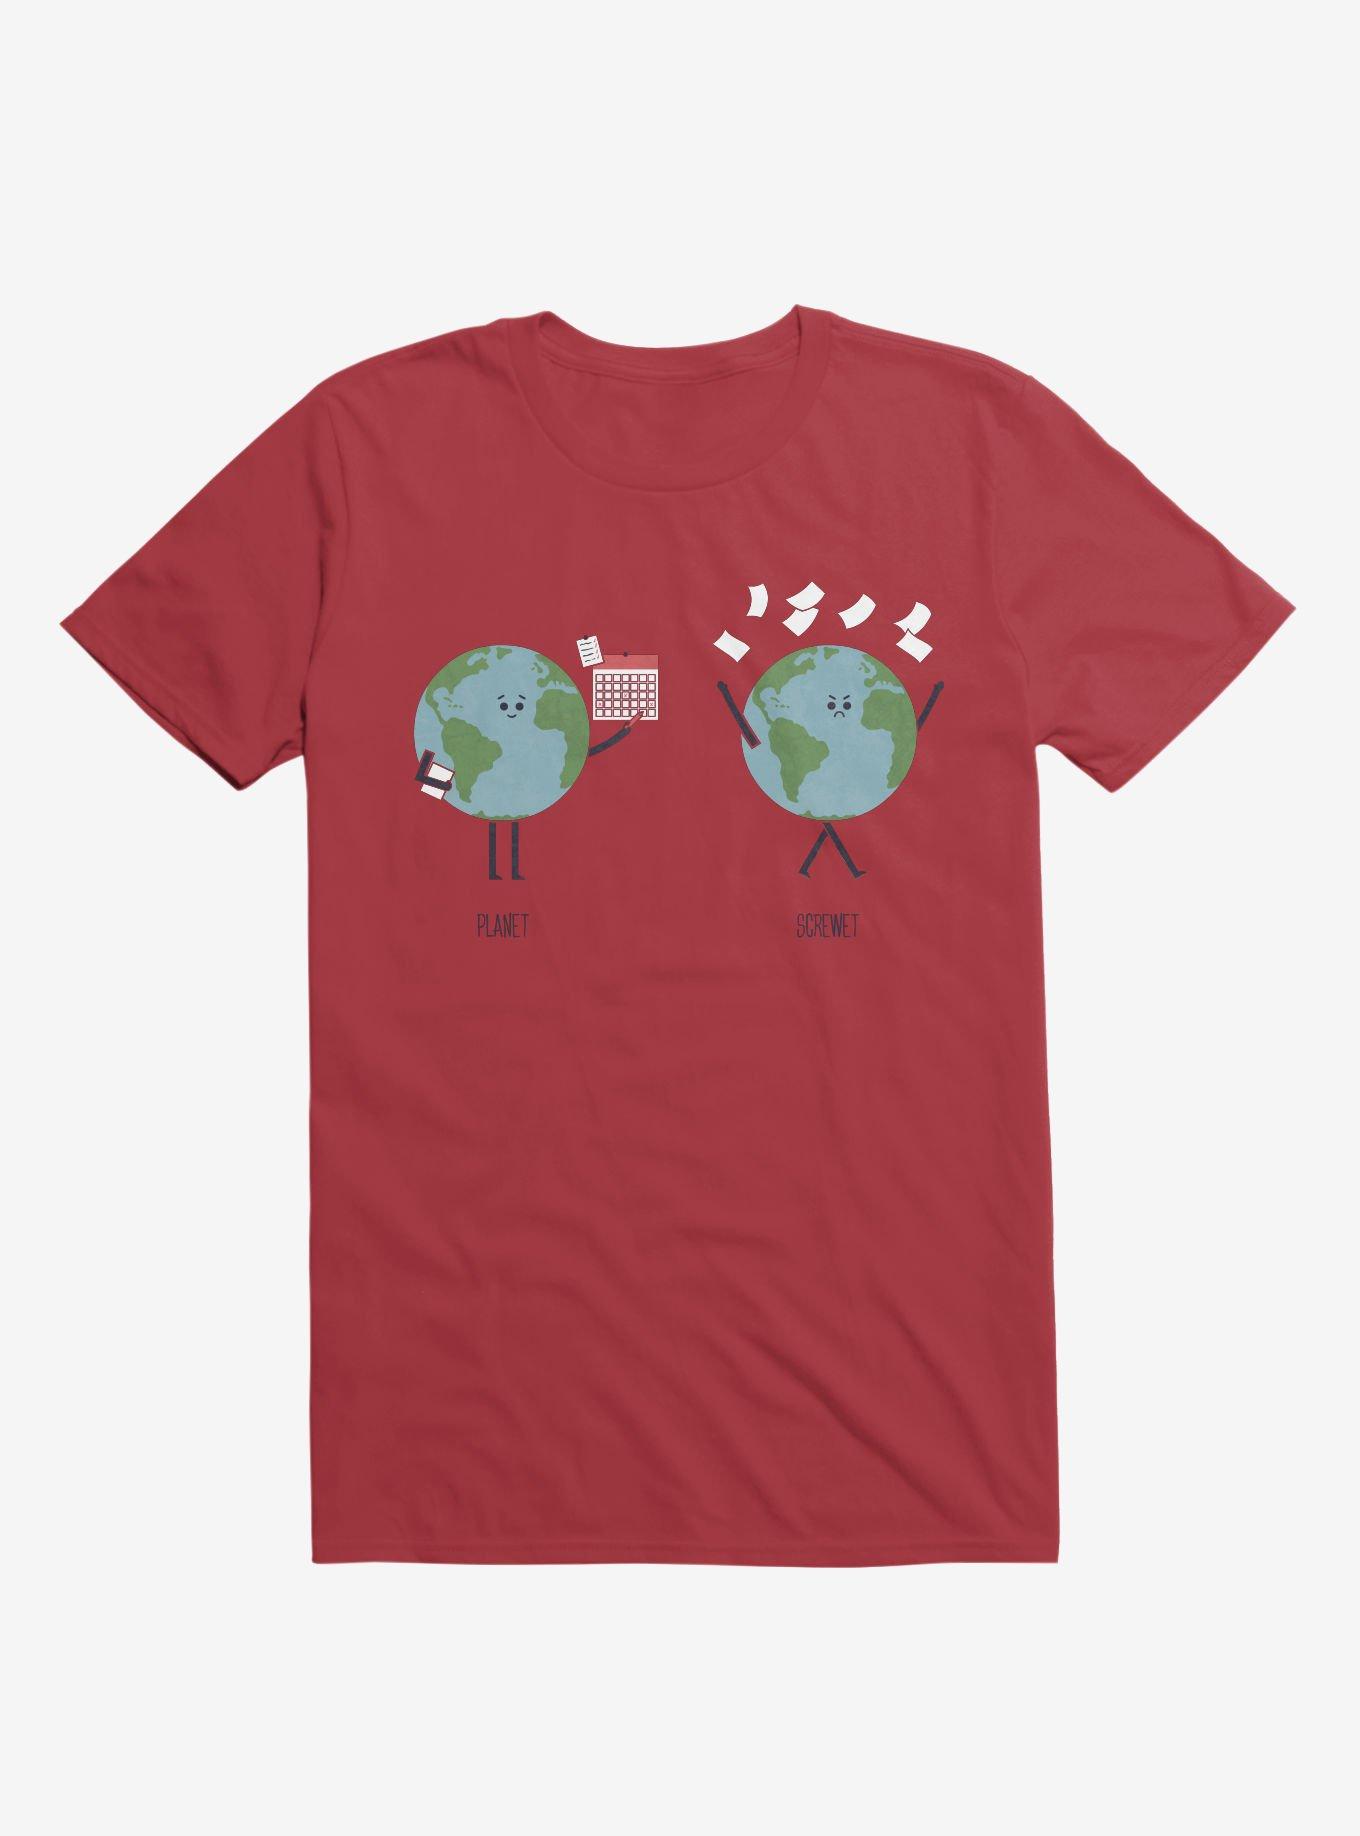 Opposites Planet Screwet Red T-Shirt, RED, hi-res